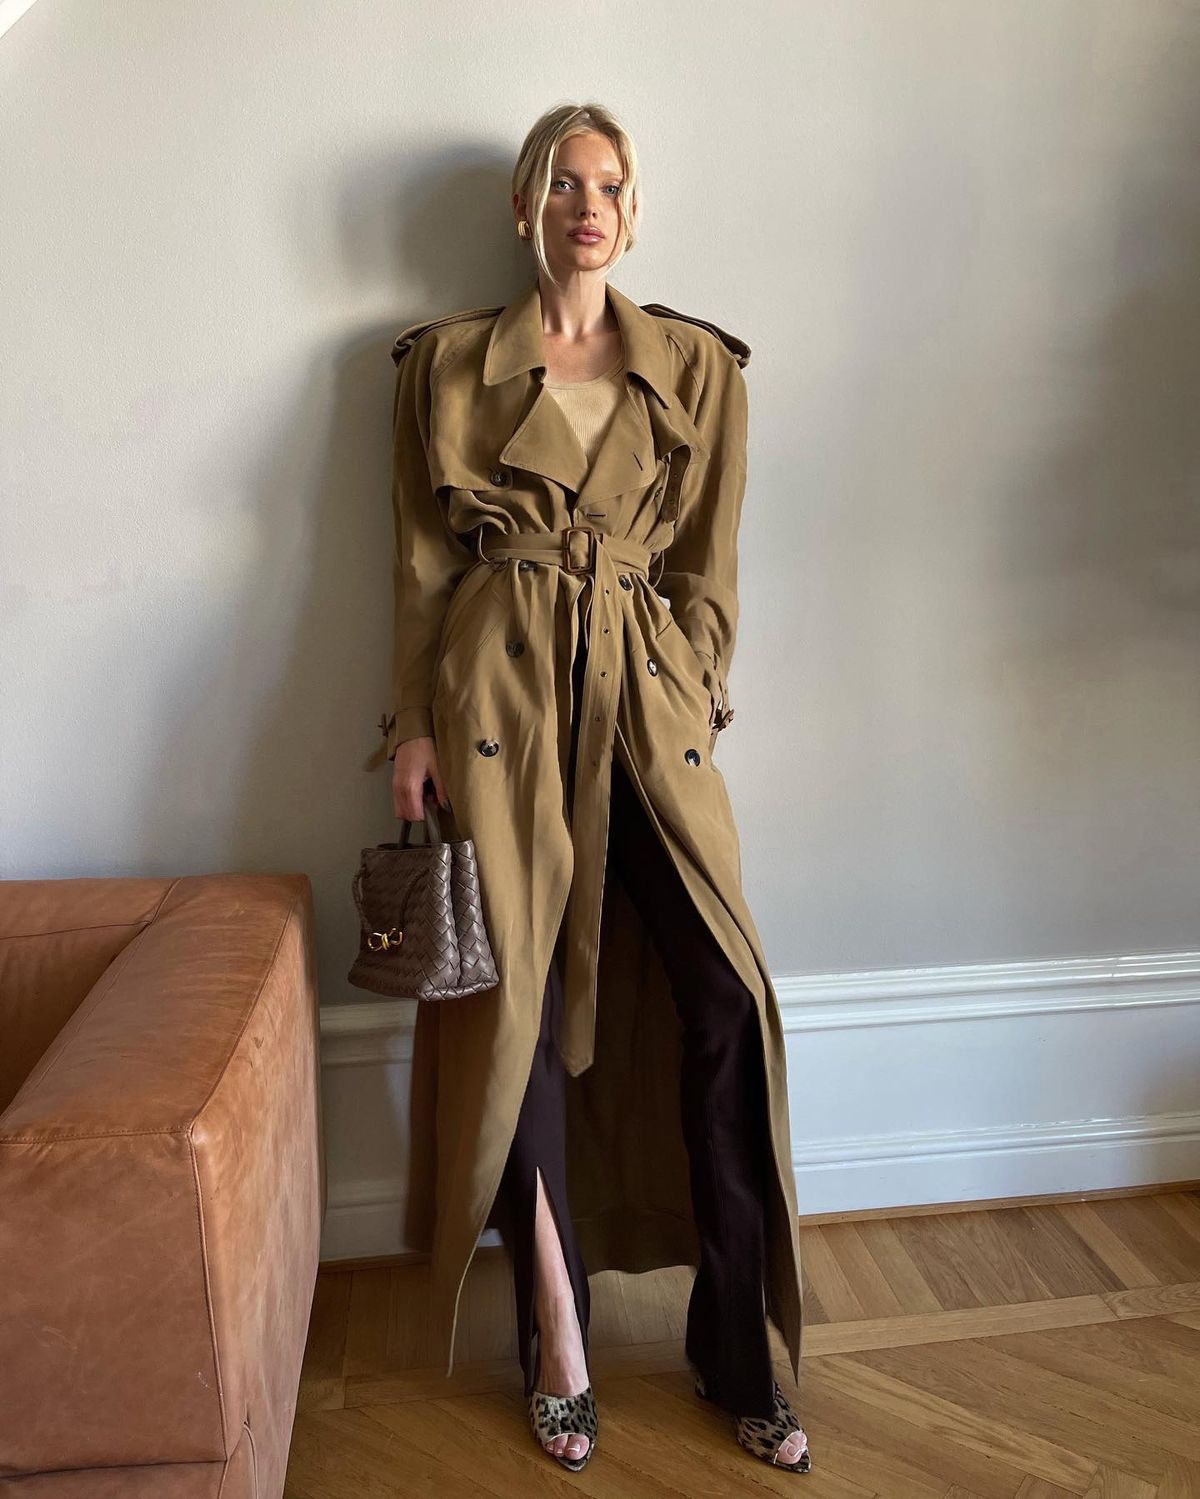 Elsa Hosk wears double-breasted trench coat by Saint Laurent, clip-on vintage earrings by Saint Laurent, and stretchy brown The Attico trousers